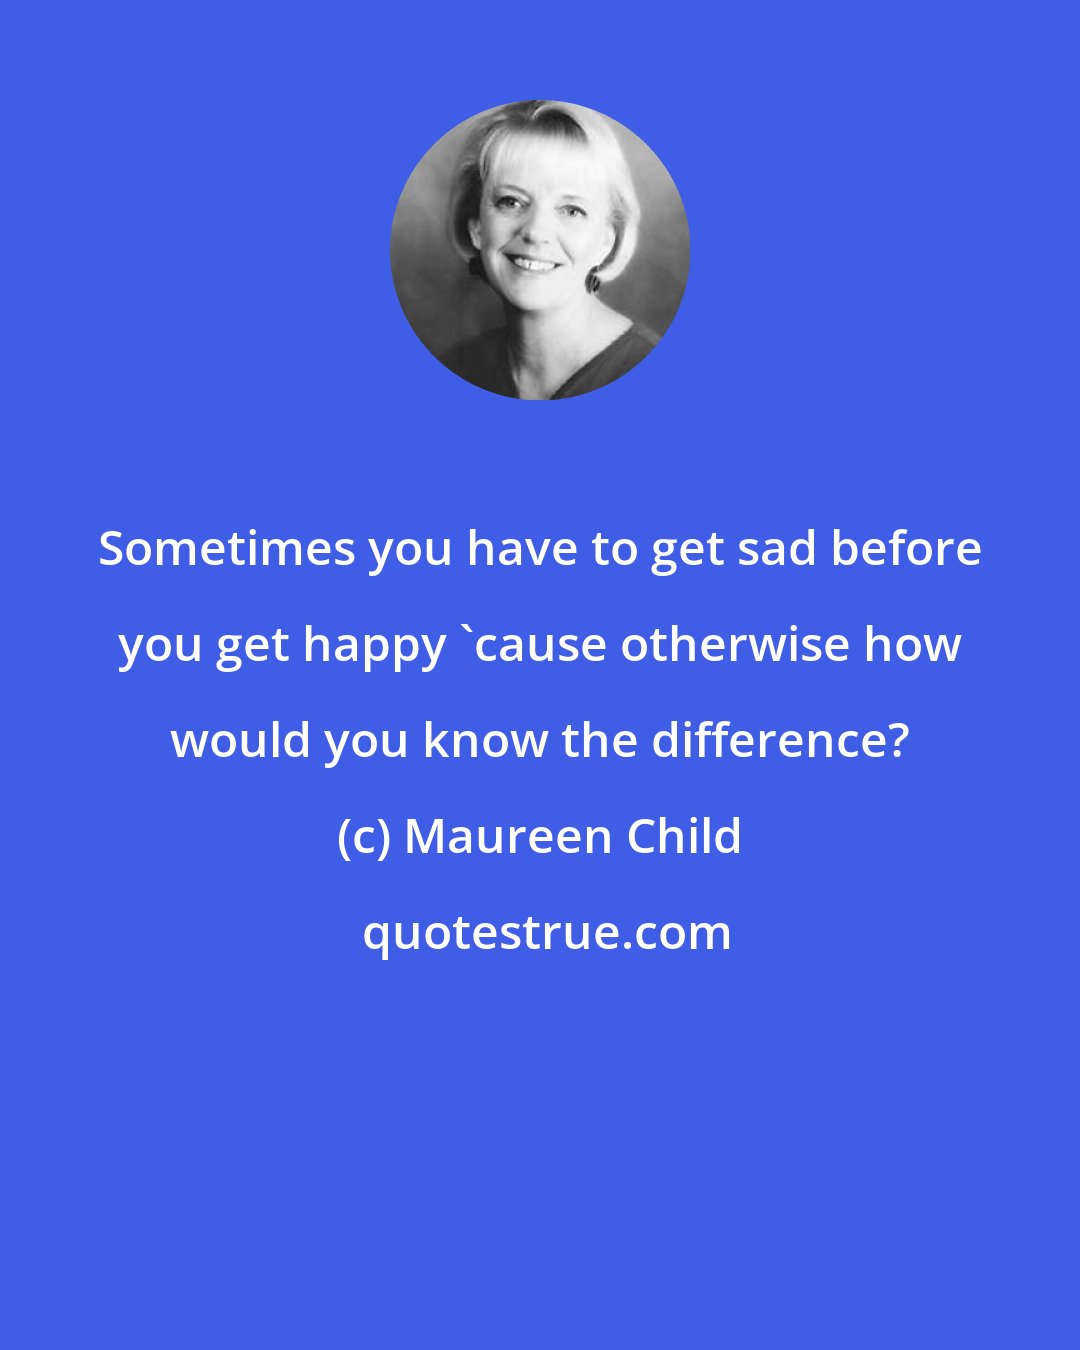 Maureen Child: Sometimes you have to get sad before you get happy 'cause otherwise how would you know the difference?